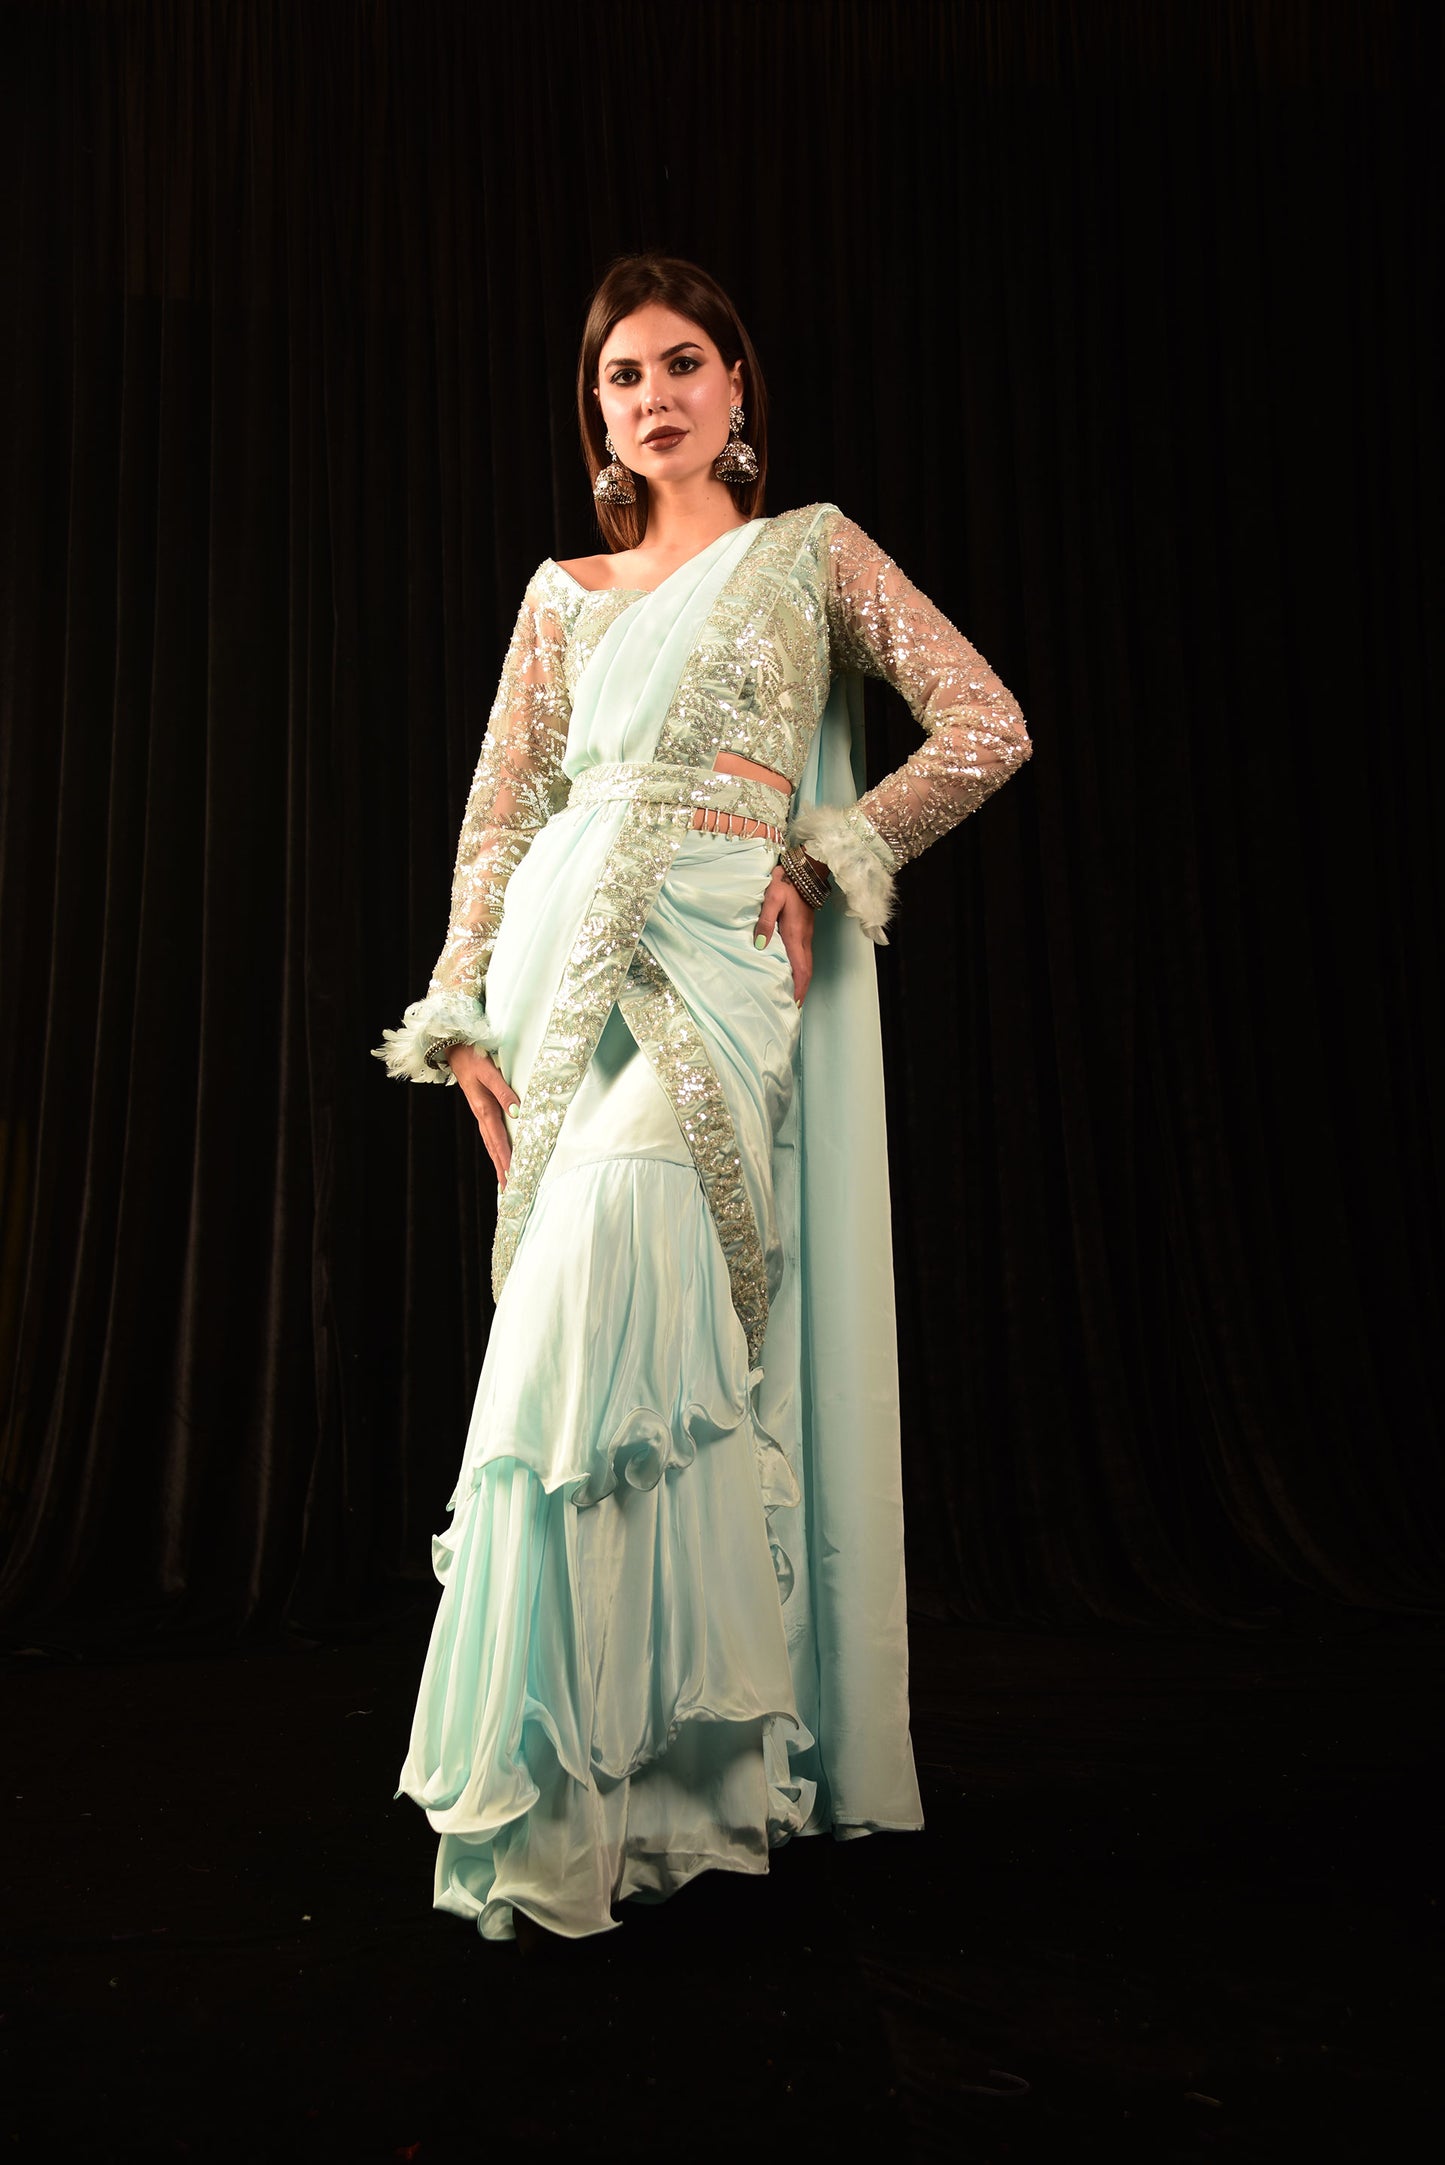 TURQUOISE BLUE PRE DRAPE SAREE WITH HAND EMBROIDED BLOUSE AND BELT